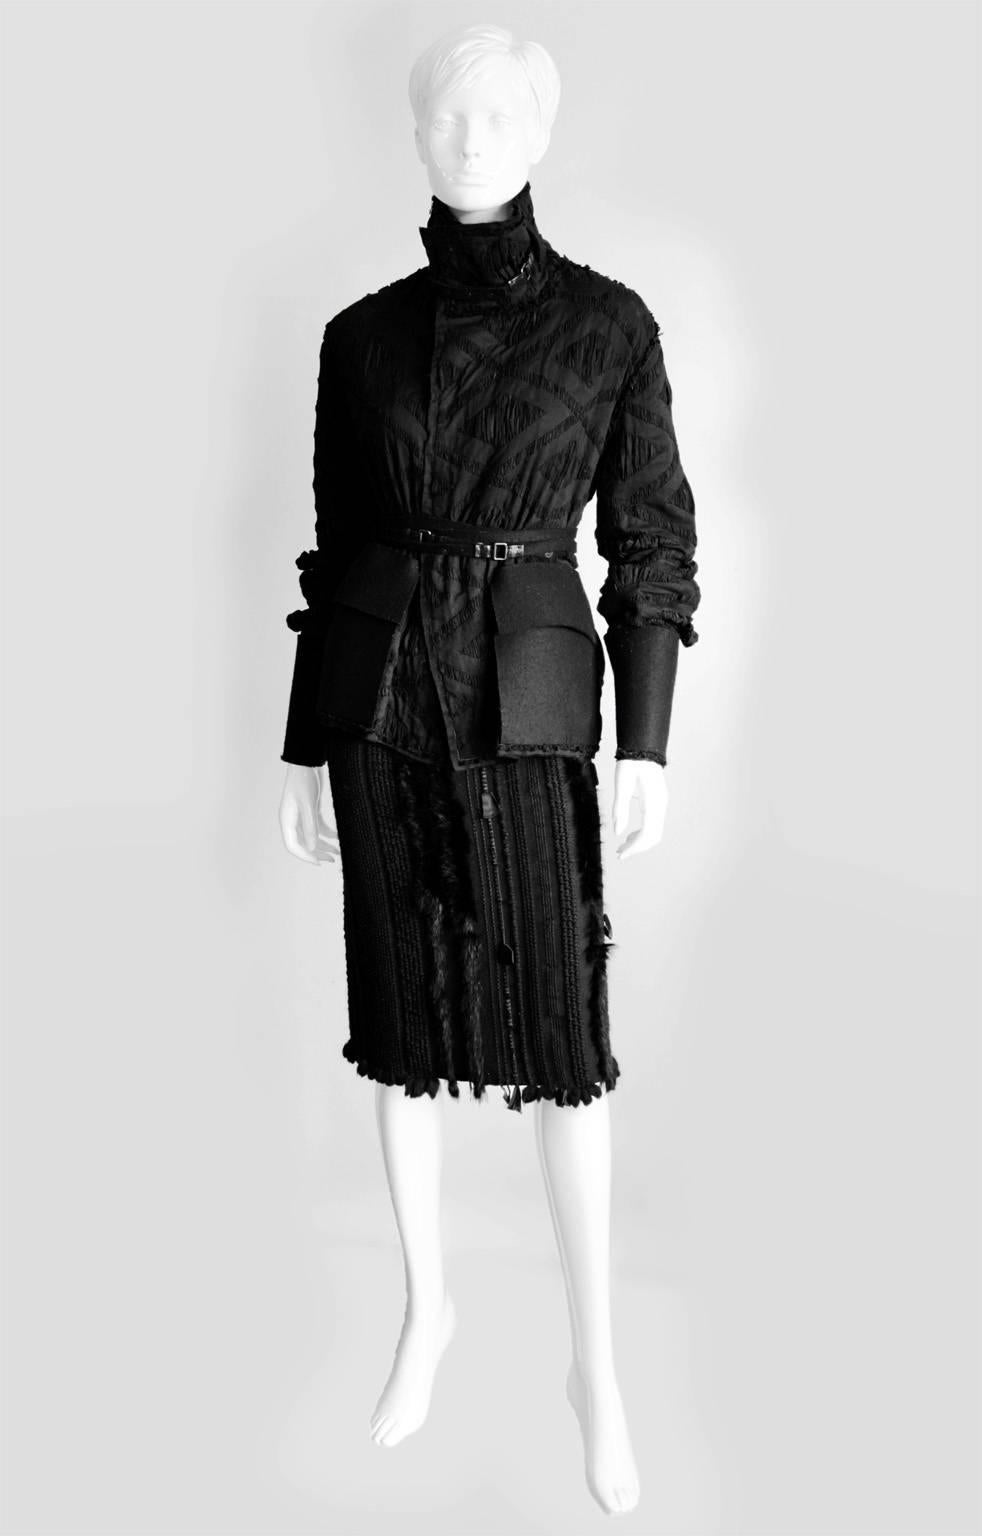 Who could ever forget Tom Ford's fall/winter 2002 Gothic Collection for Gucci... with that dark chinoiseriesque styling & heavenly detailing? This extraordinary jacket & skirt, surely two of the most memorable Ford pieces of all, were twi of the